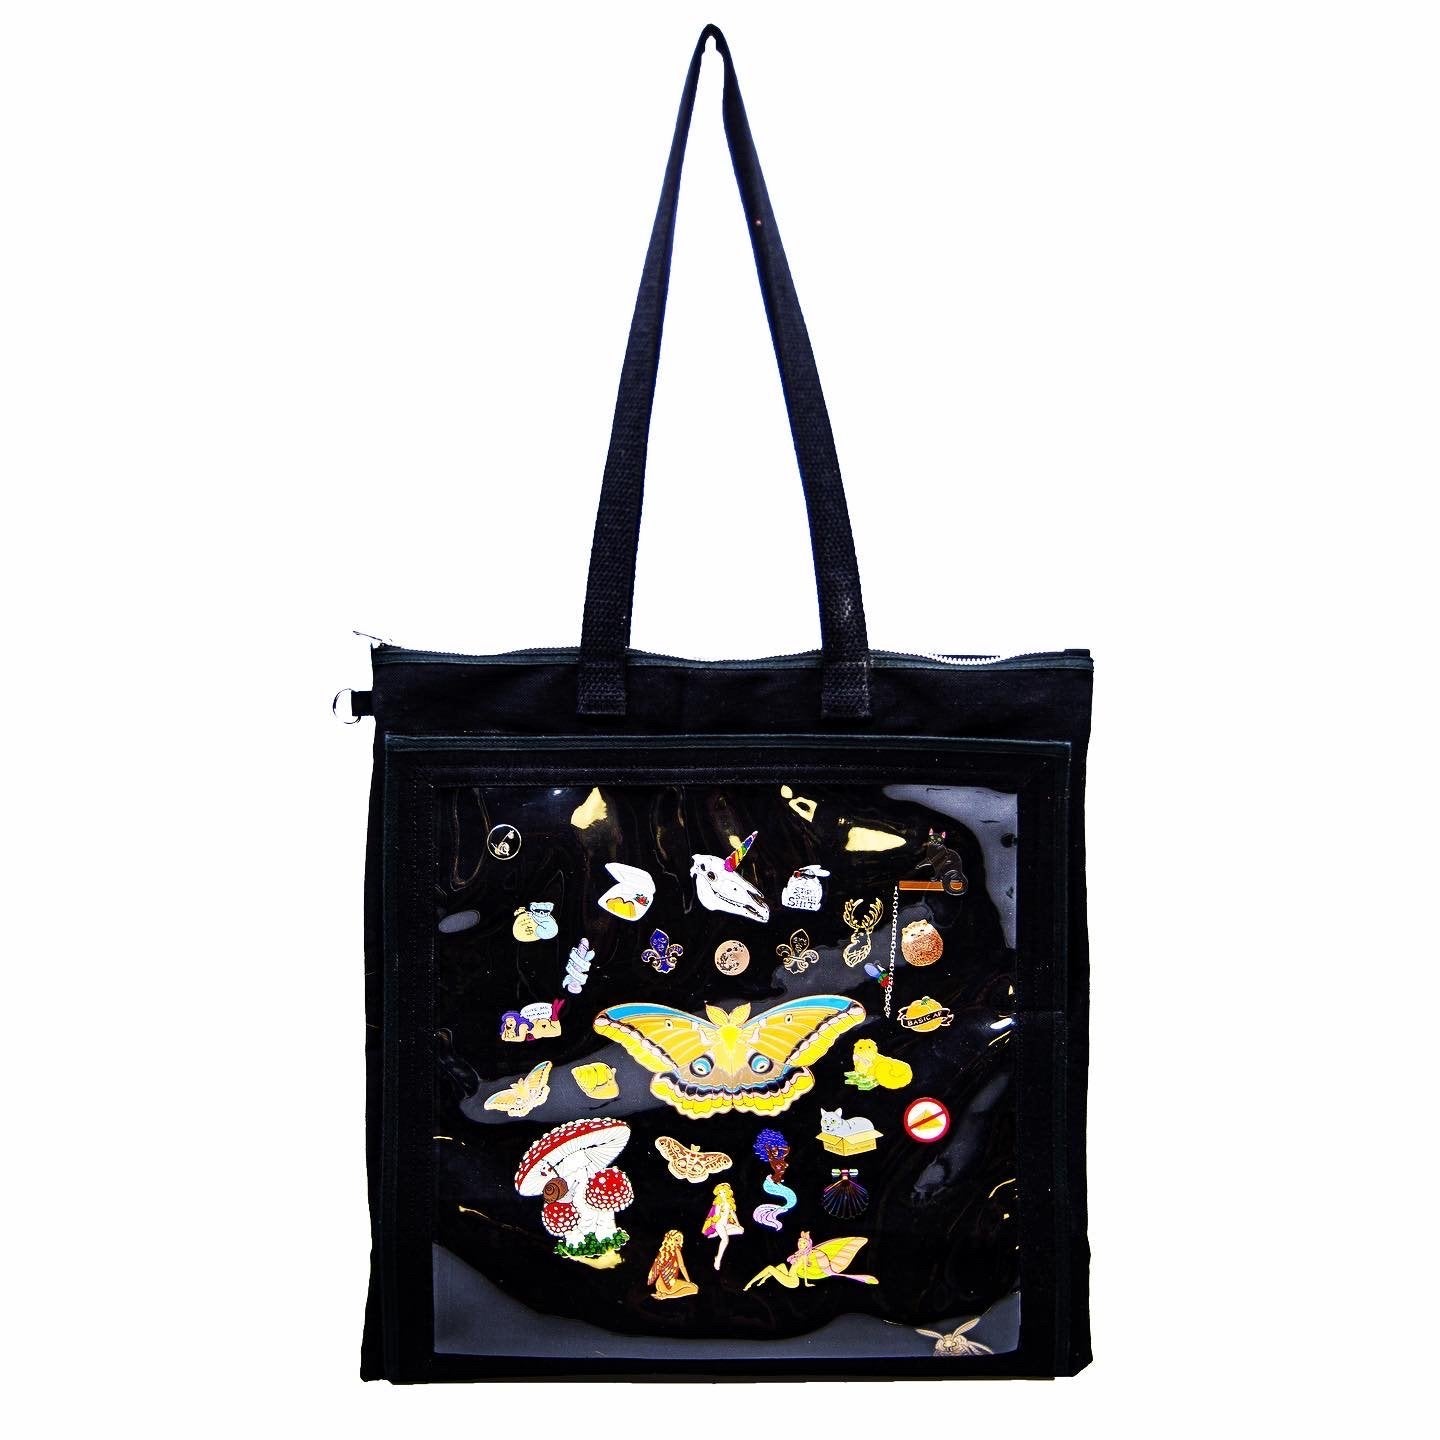 A black canvas Ita tote displaying enamel pins. The tote is big enough to hold vinyl records, a jacket, or a change of clothes.